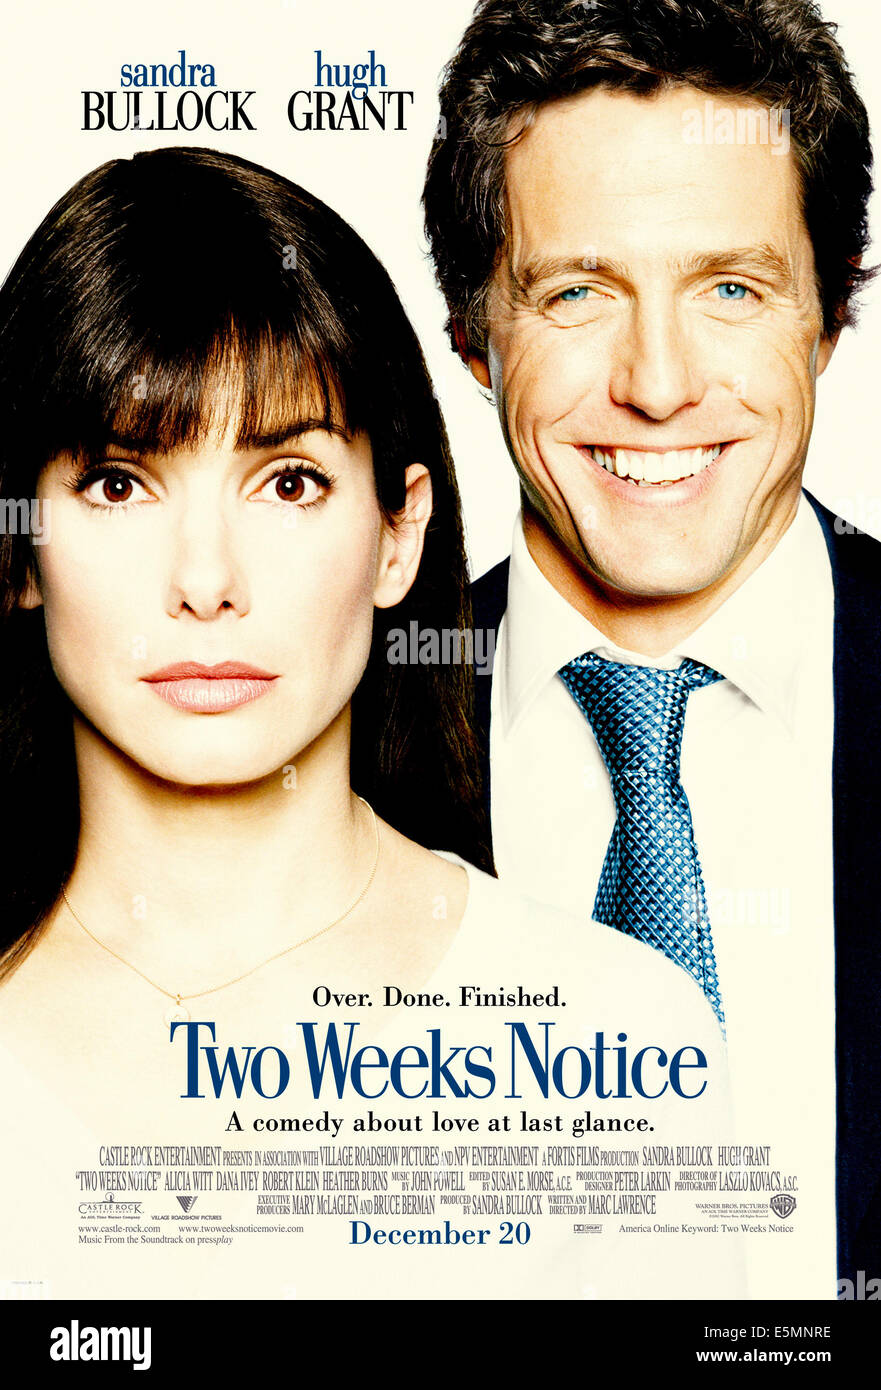 Sandra Bullock Poster High Resolution Stock Photography and Images - Alamy